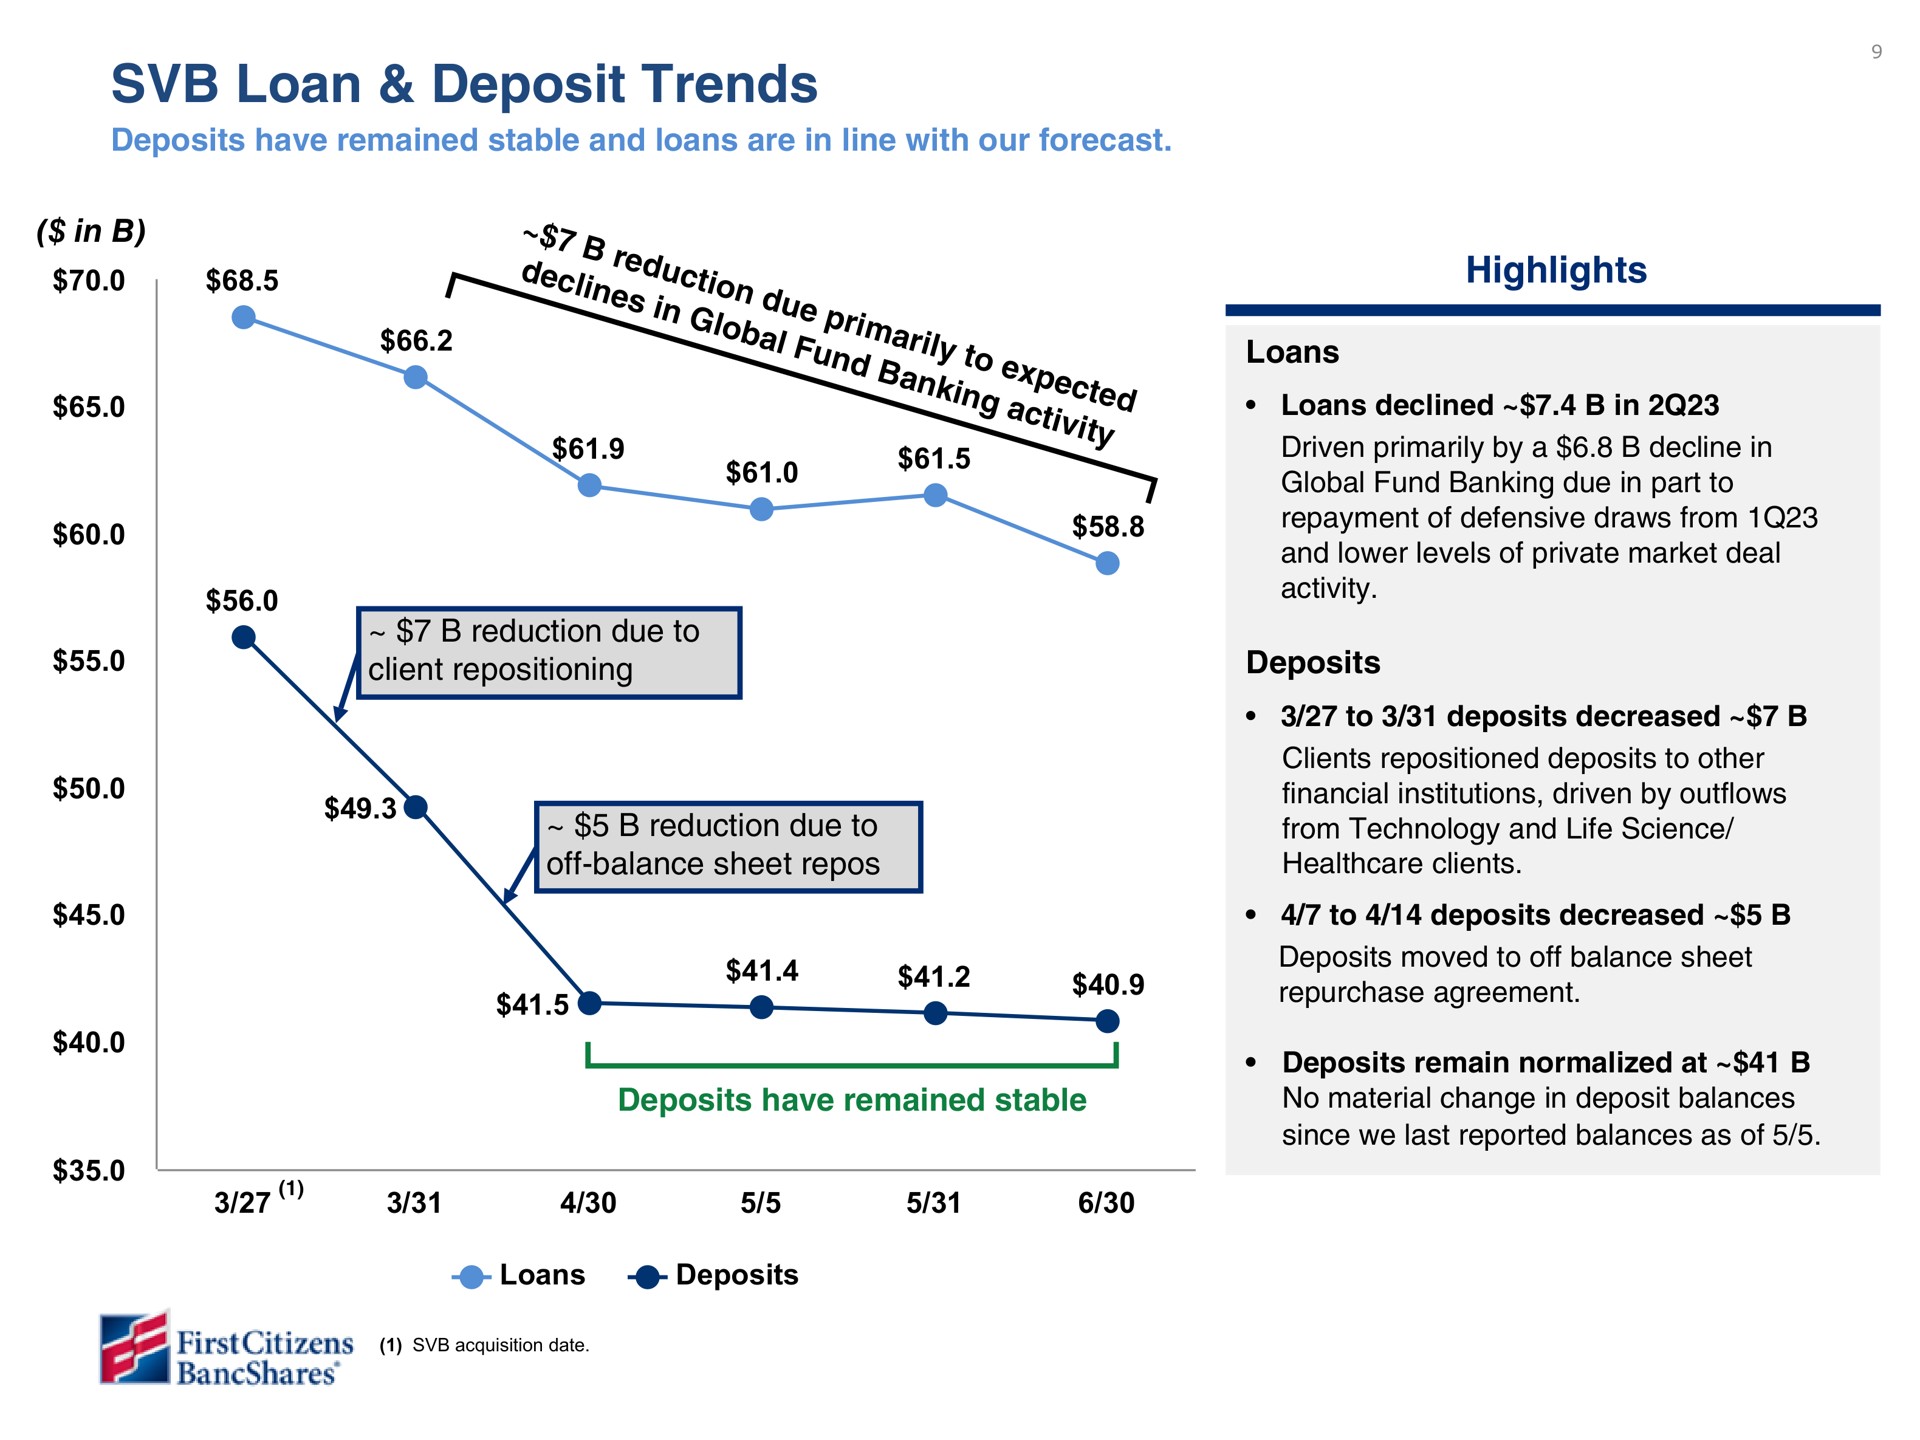 loan deposit trends in a to king client repositioning highlights loans loans declined in deposits repurchase agreement | First Citizens BancShares